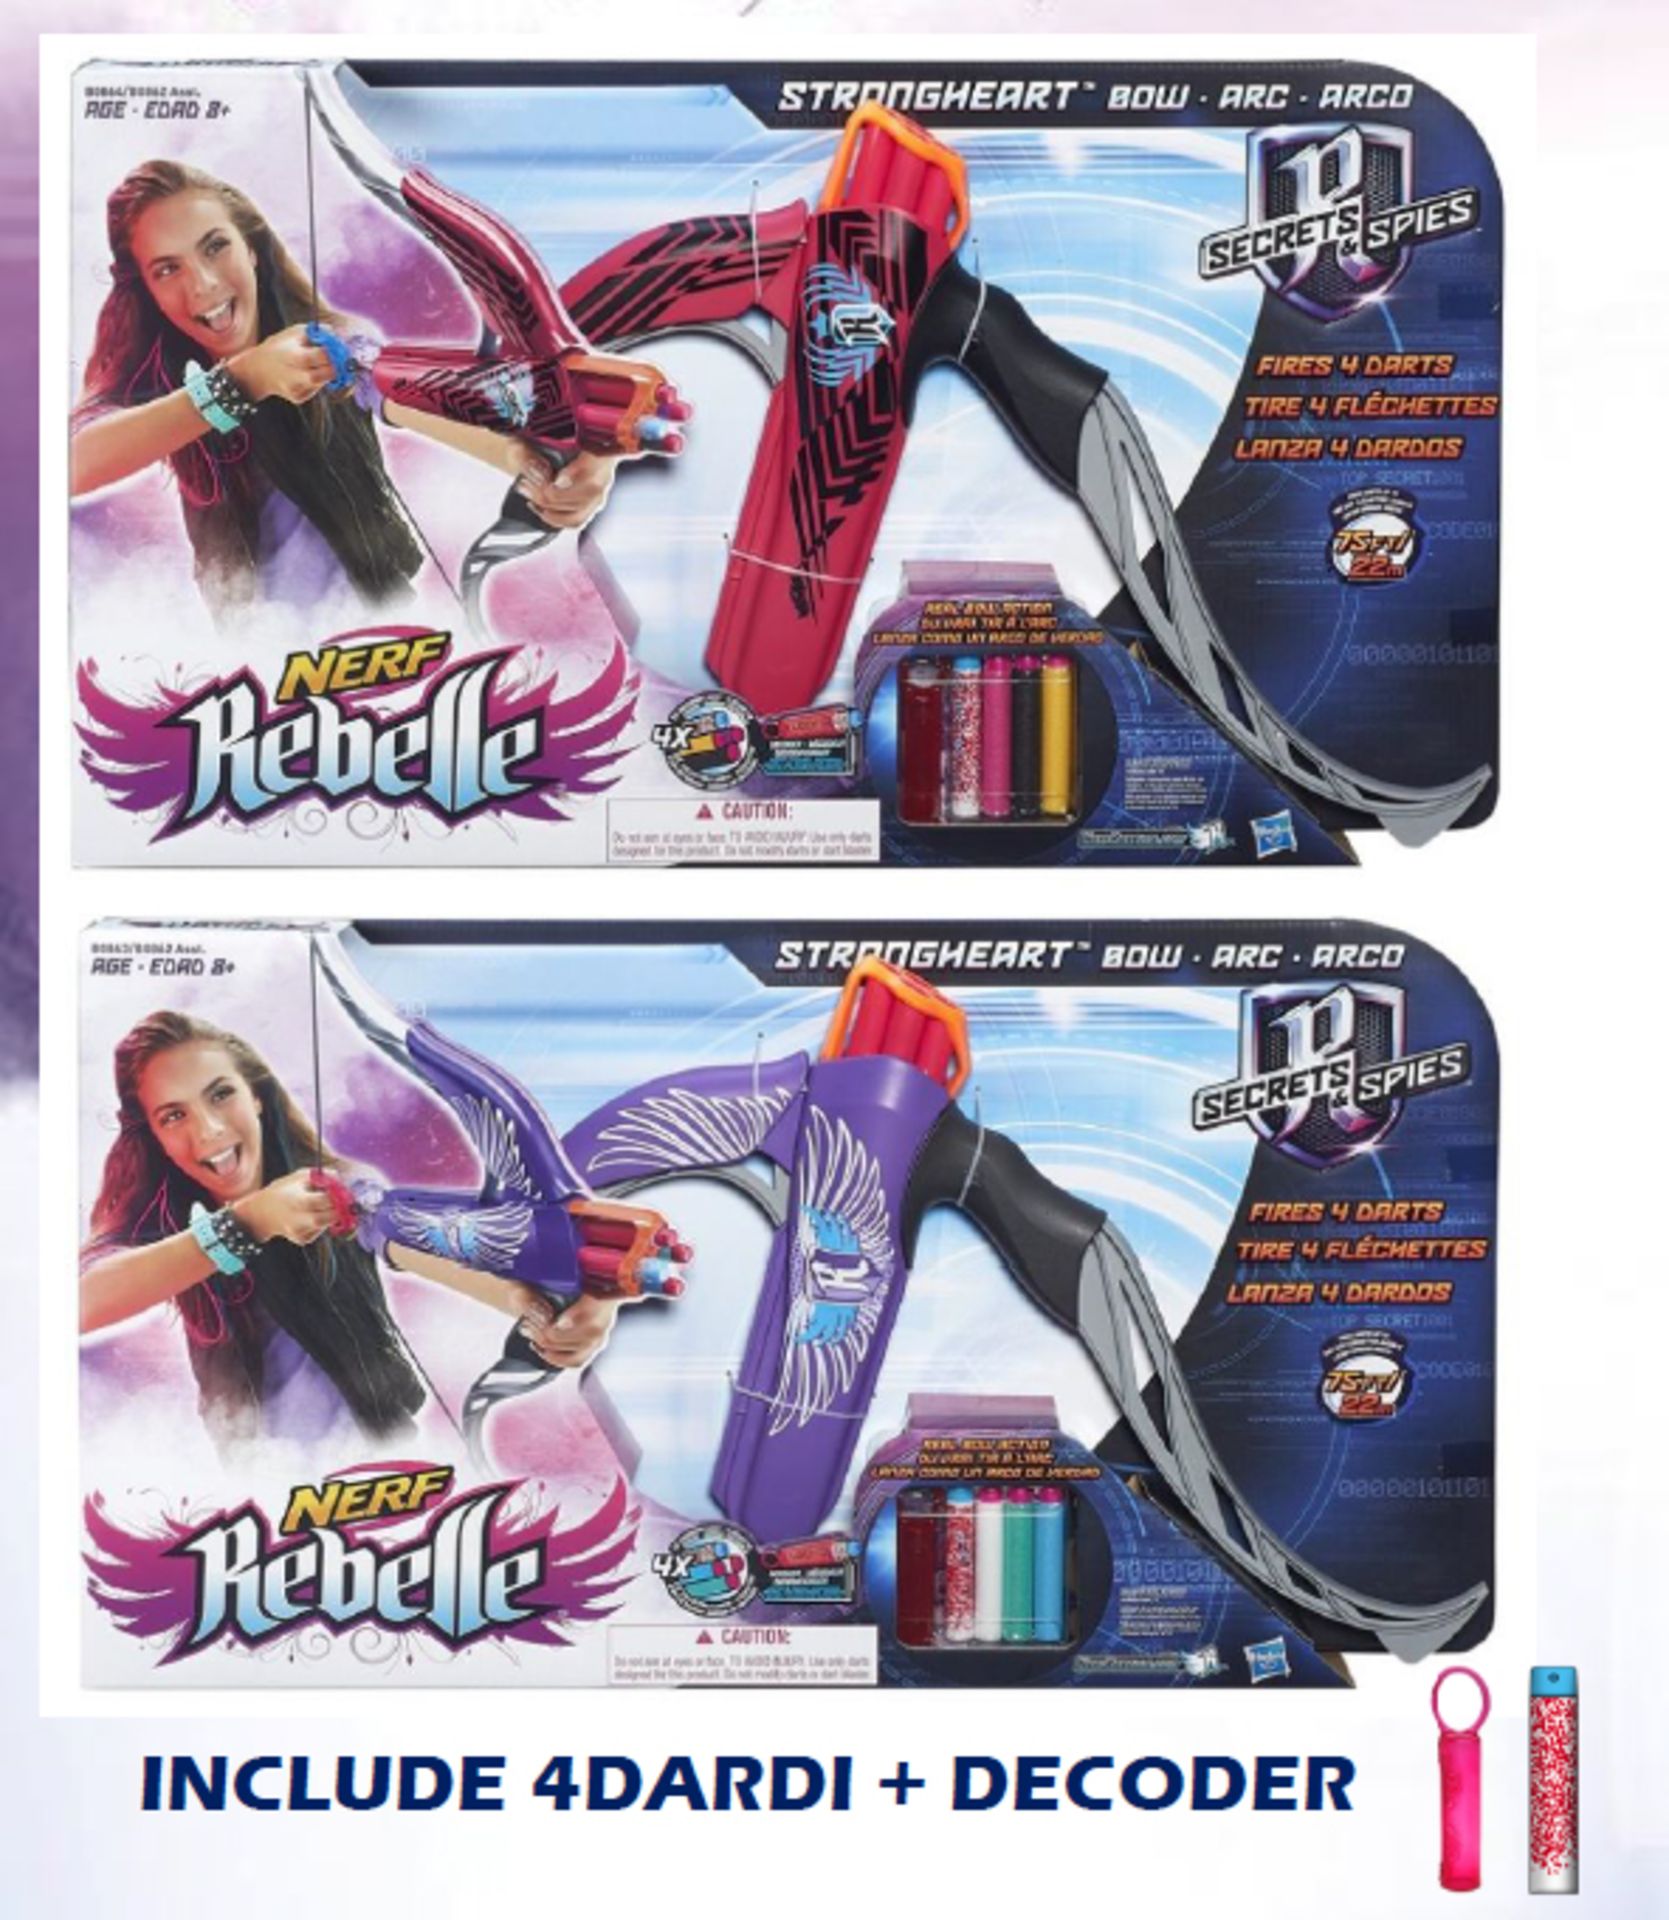 V *TRADE QTY* Brand New Nerf Rebelle Secrets and Spies Strongheart Bow X 5 YOUR BID PRICE TO BE